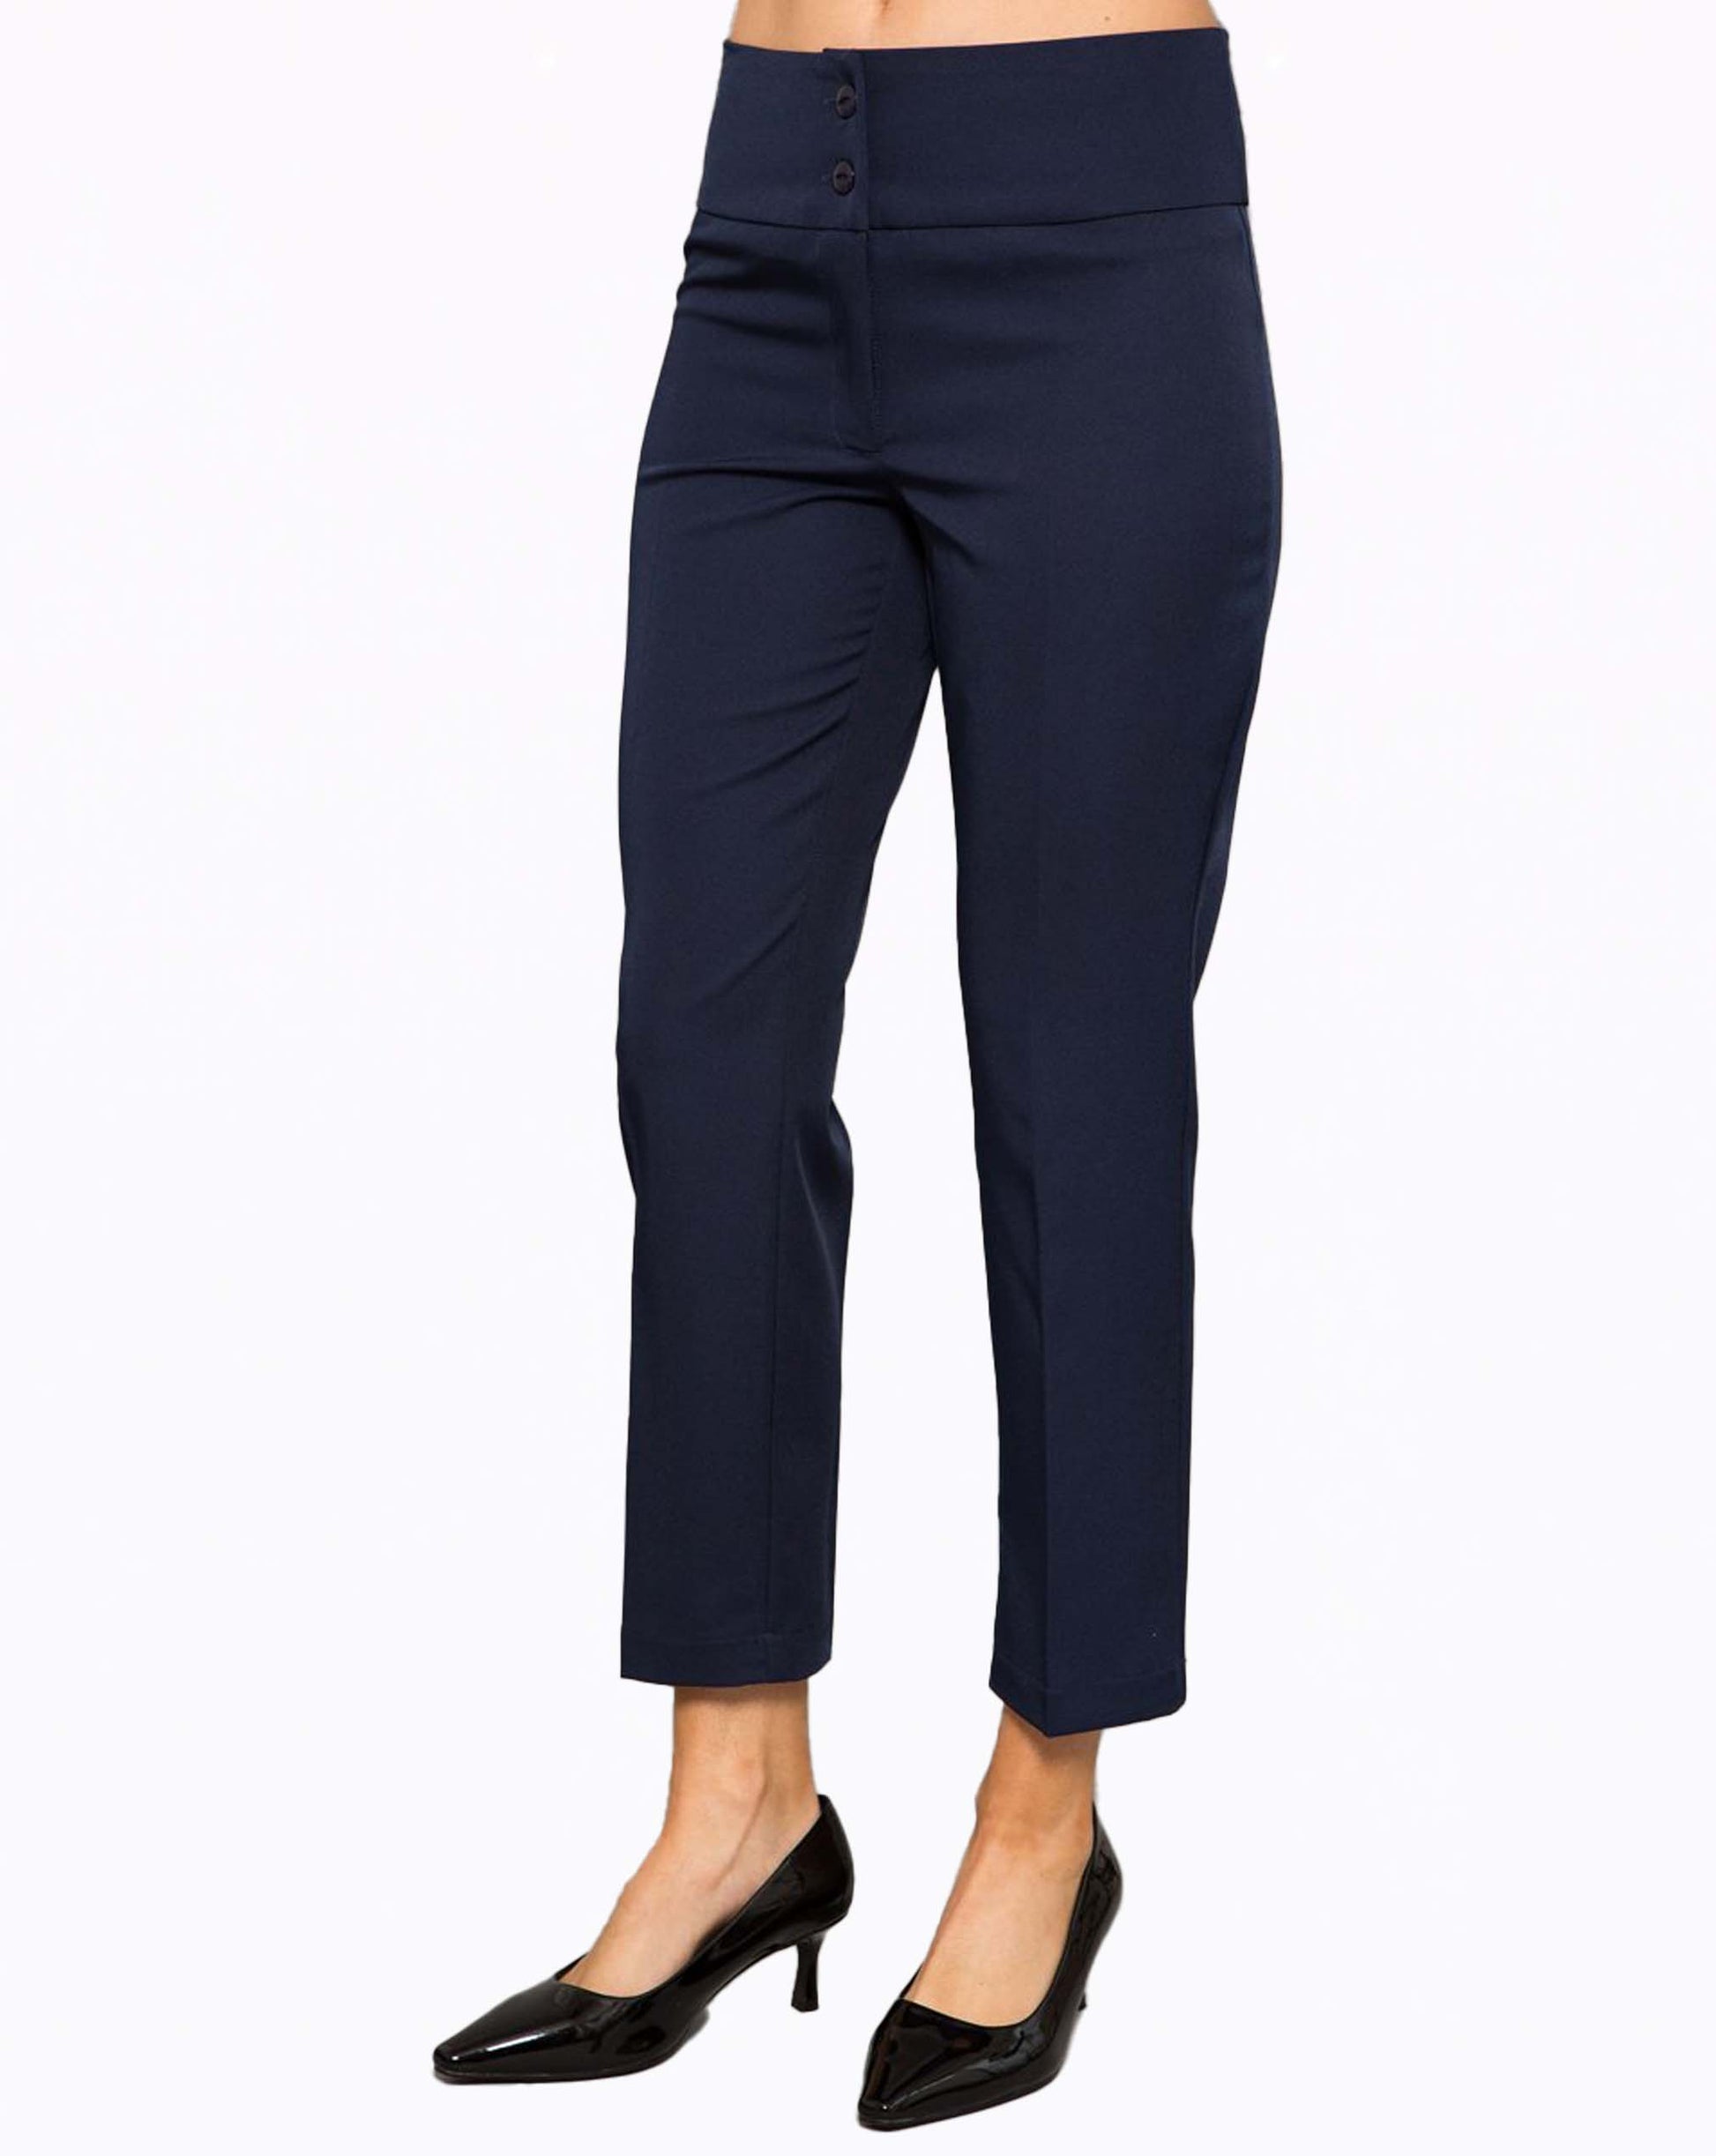 Women's Ankle Work Pants & Trousers